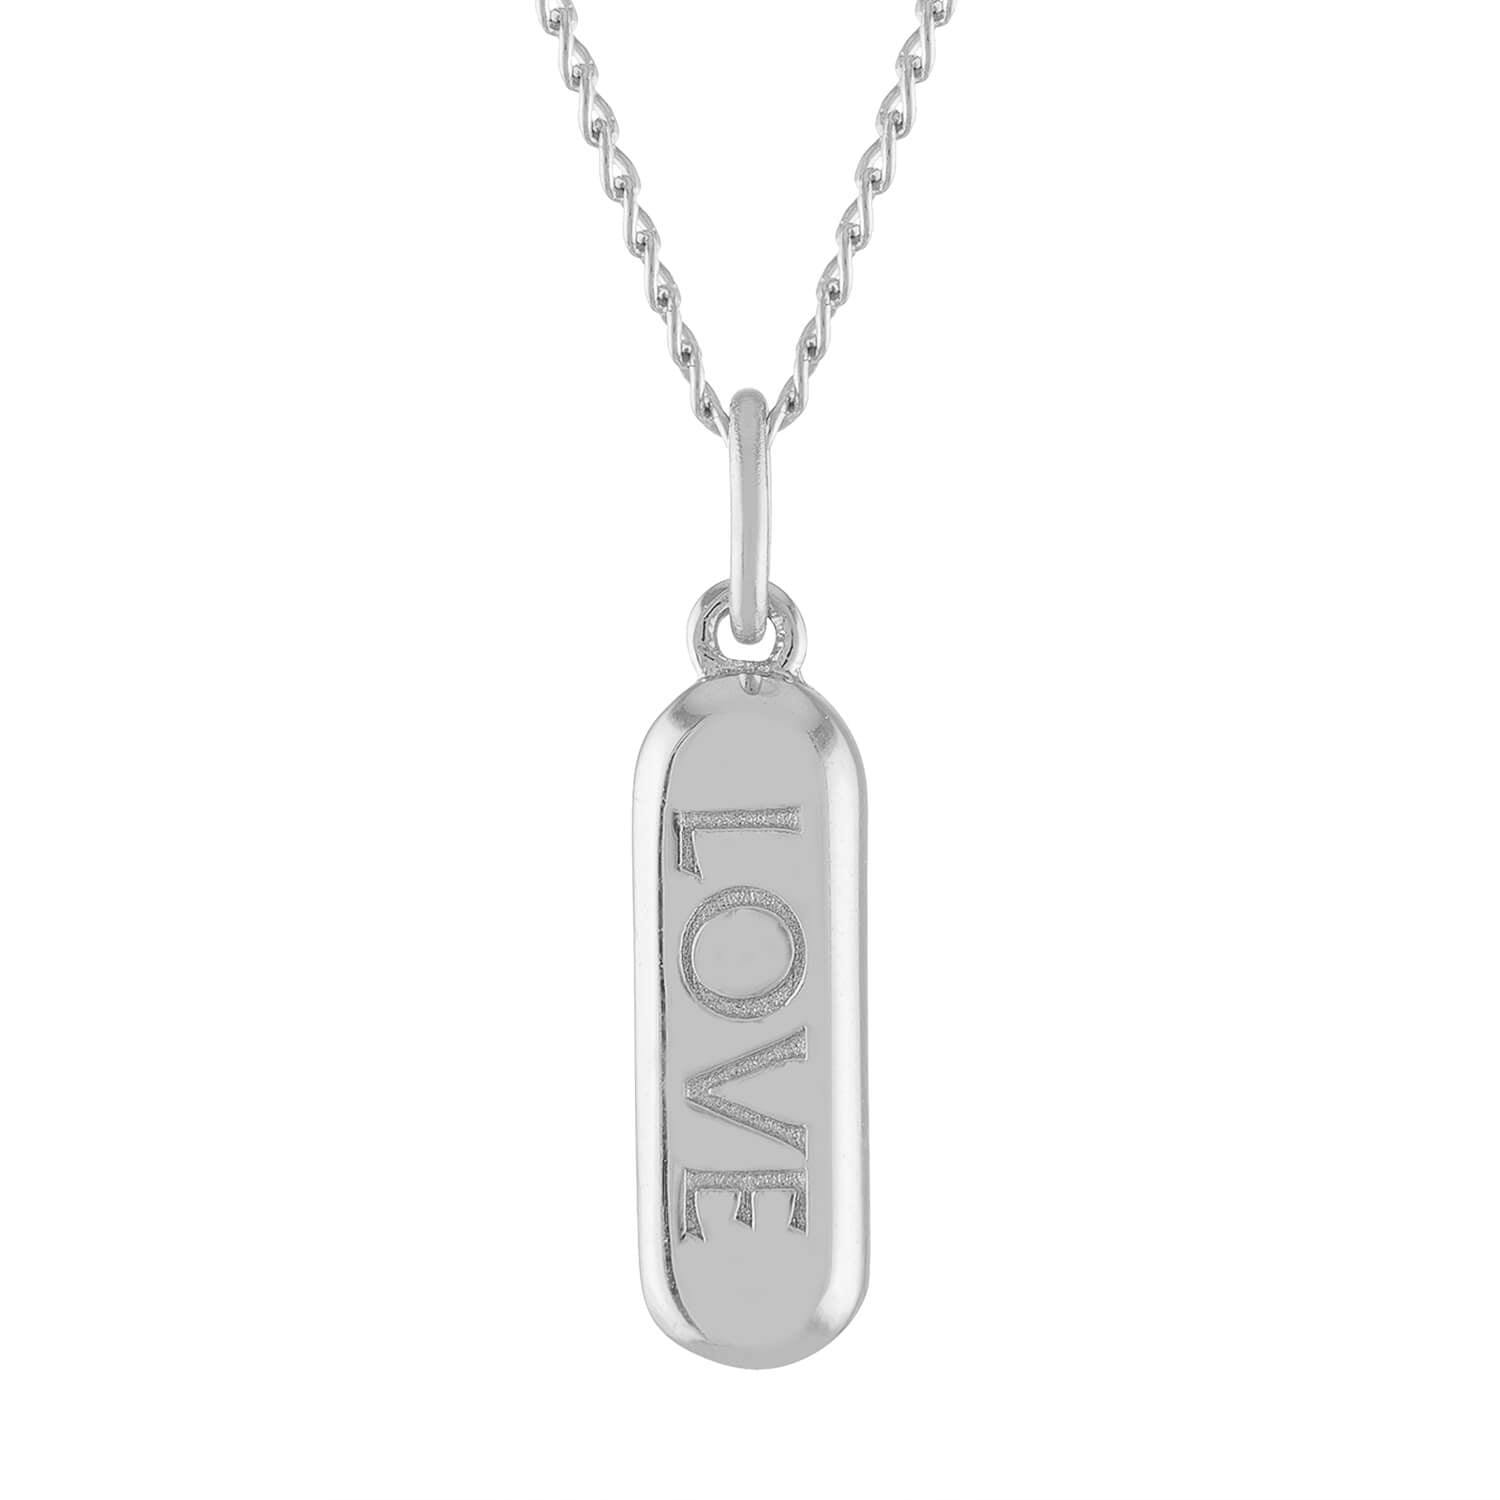 Love Pill Charm Necklace in Sterling Silver